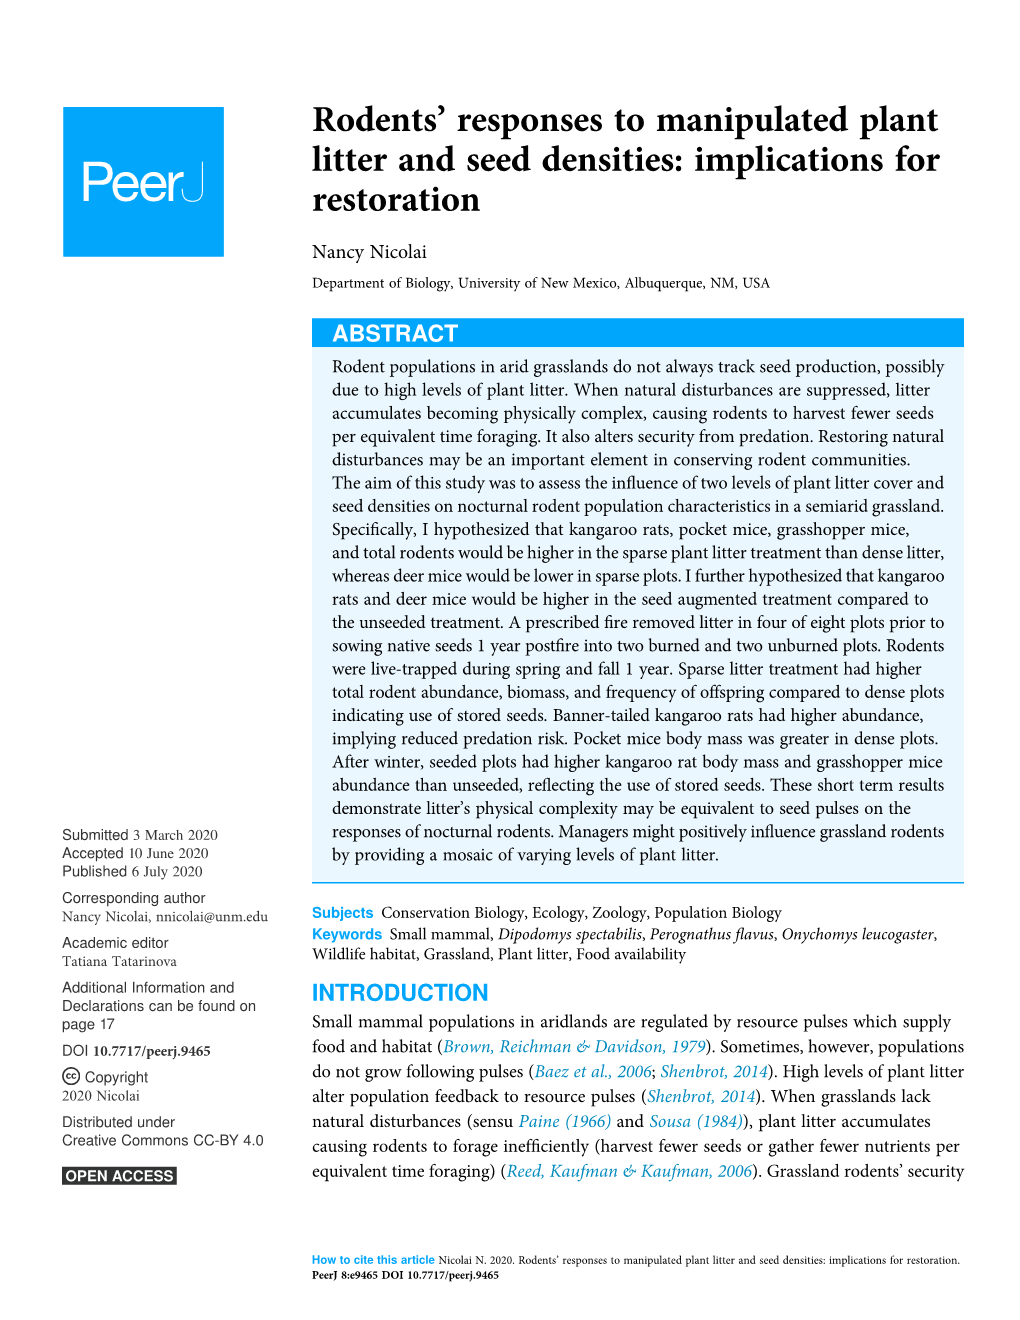 Rodents' Responses to Manipulated Plant Litter and Seed Densities